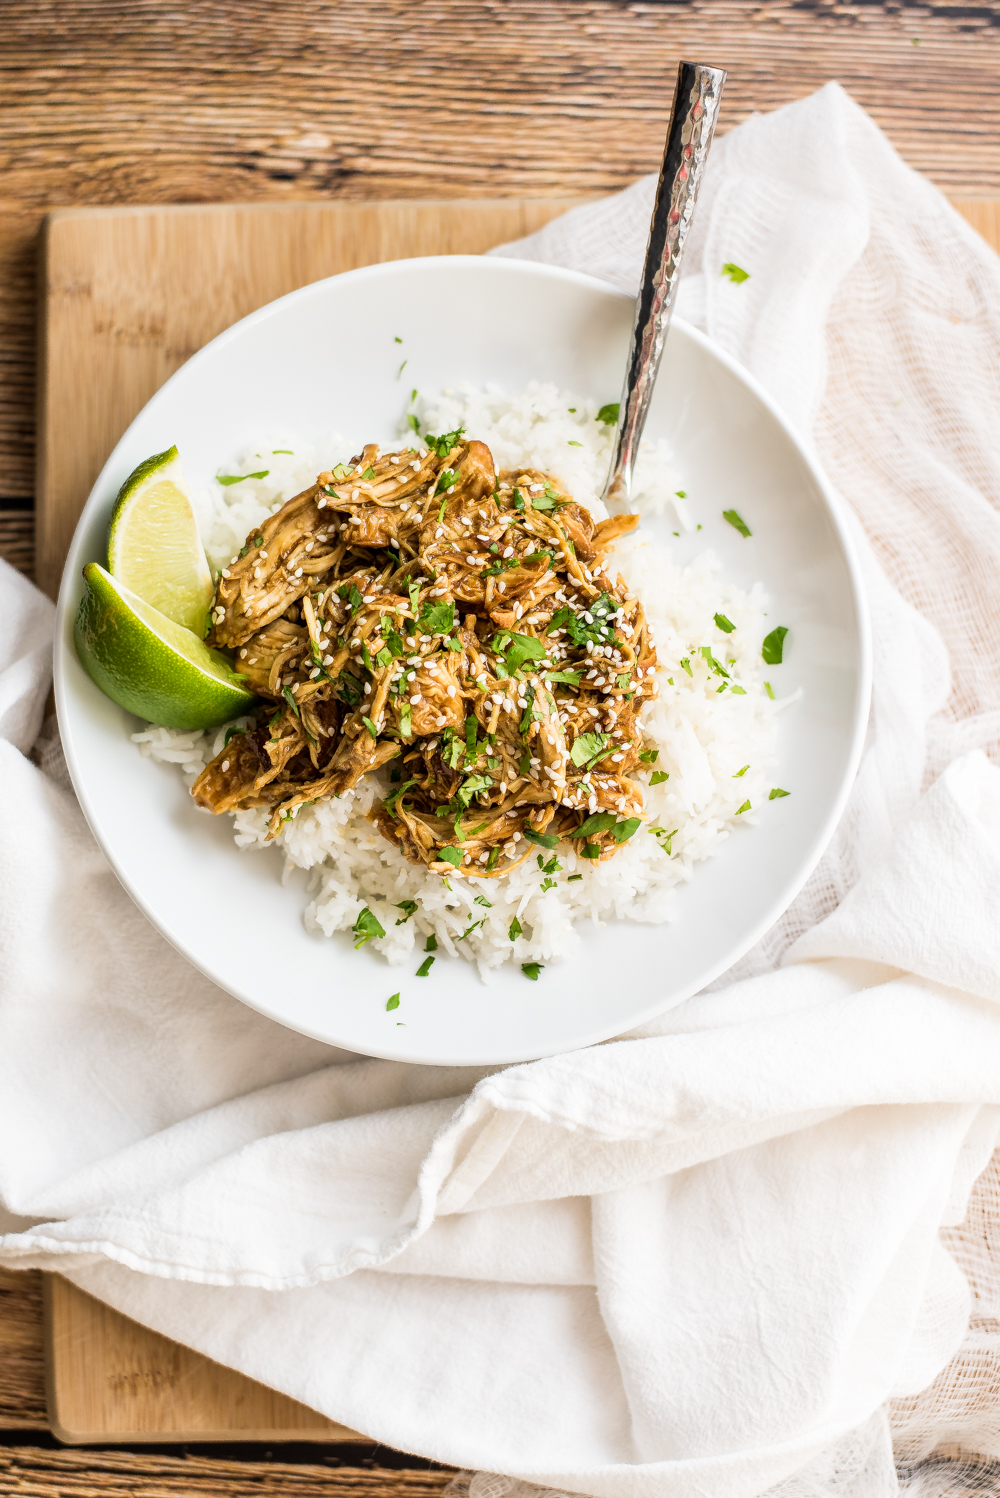 Slow cooker chicken teriyaki is a super flavorful and delicious weeknight dinner recipe. It's perfect served on a bed of rice or a taco shell!